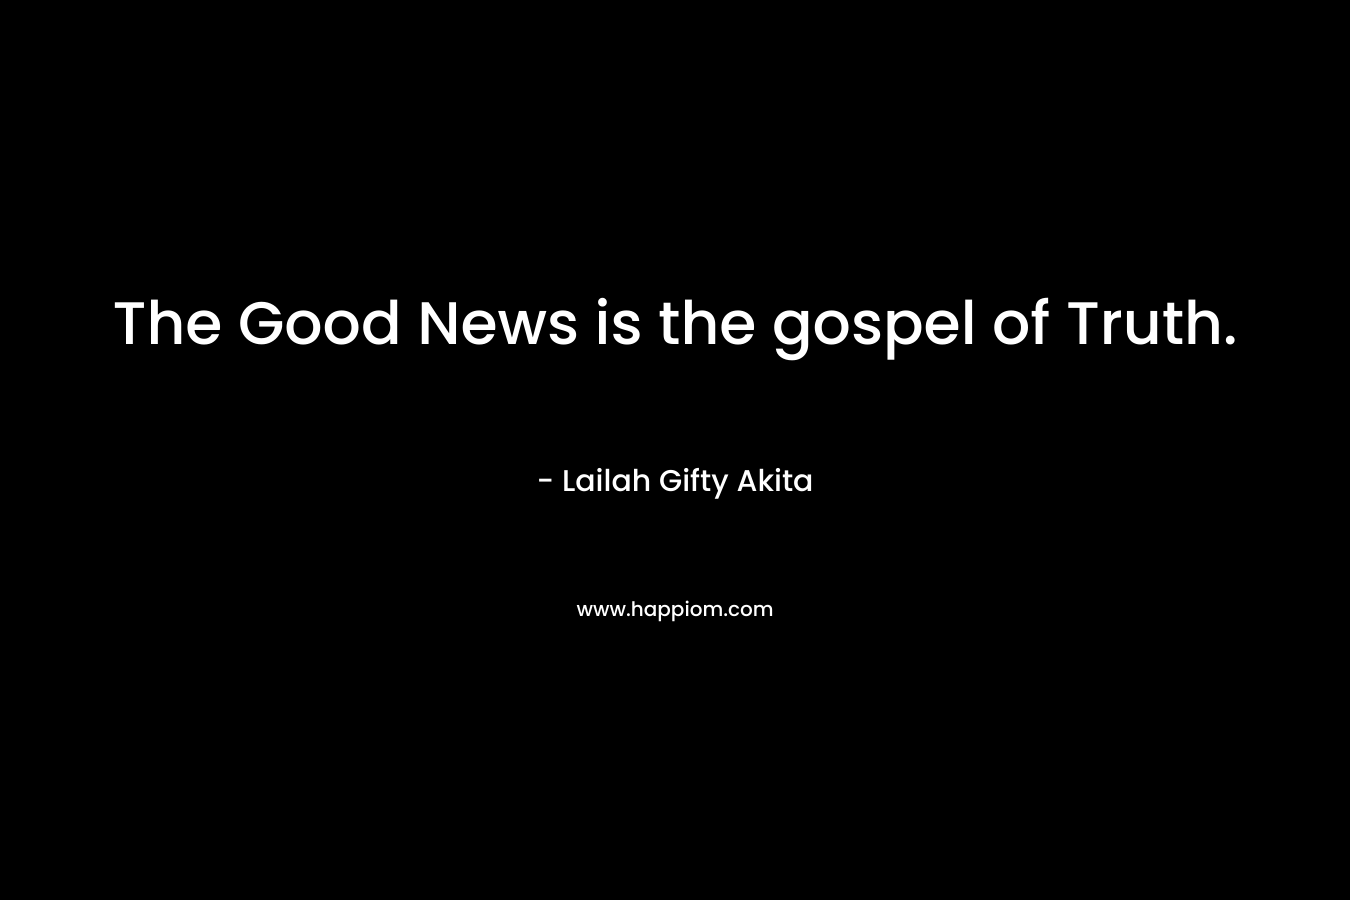 The Good News is the gospel of Truth.